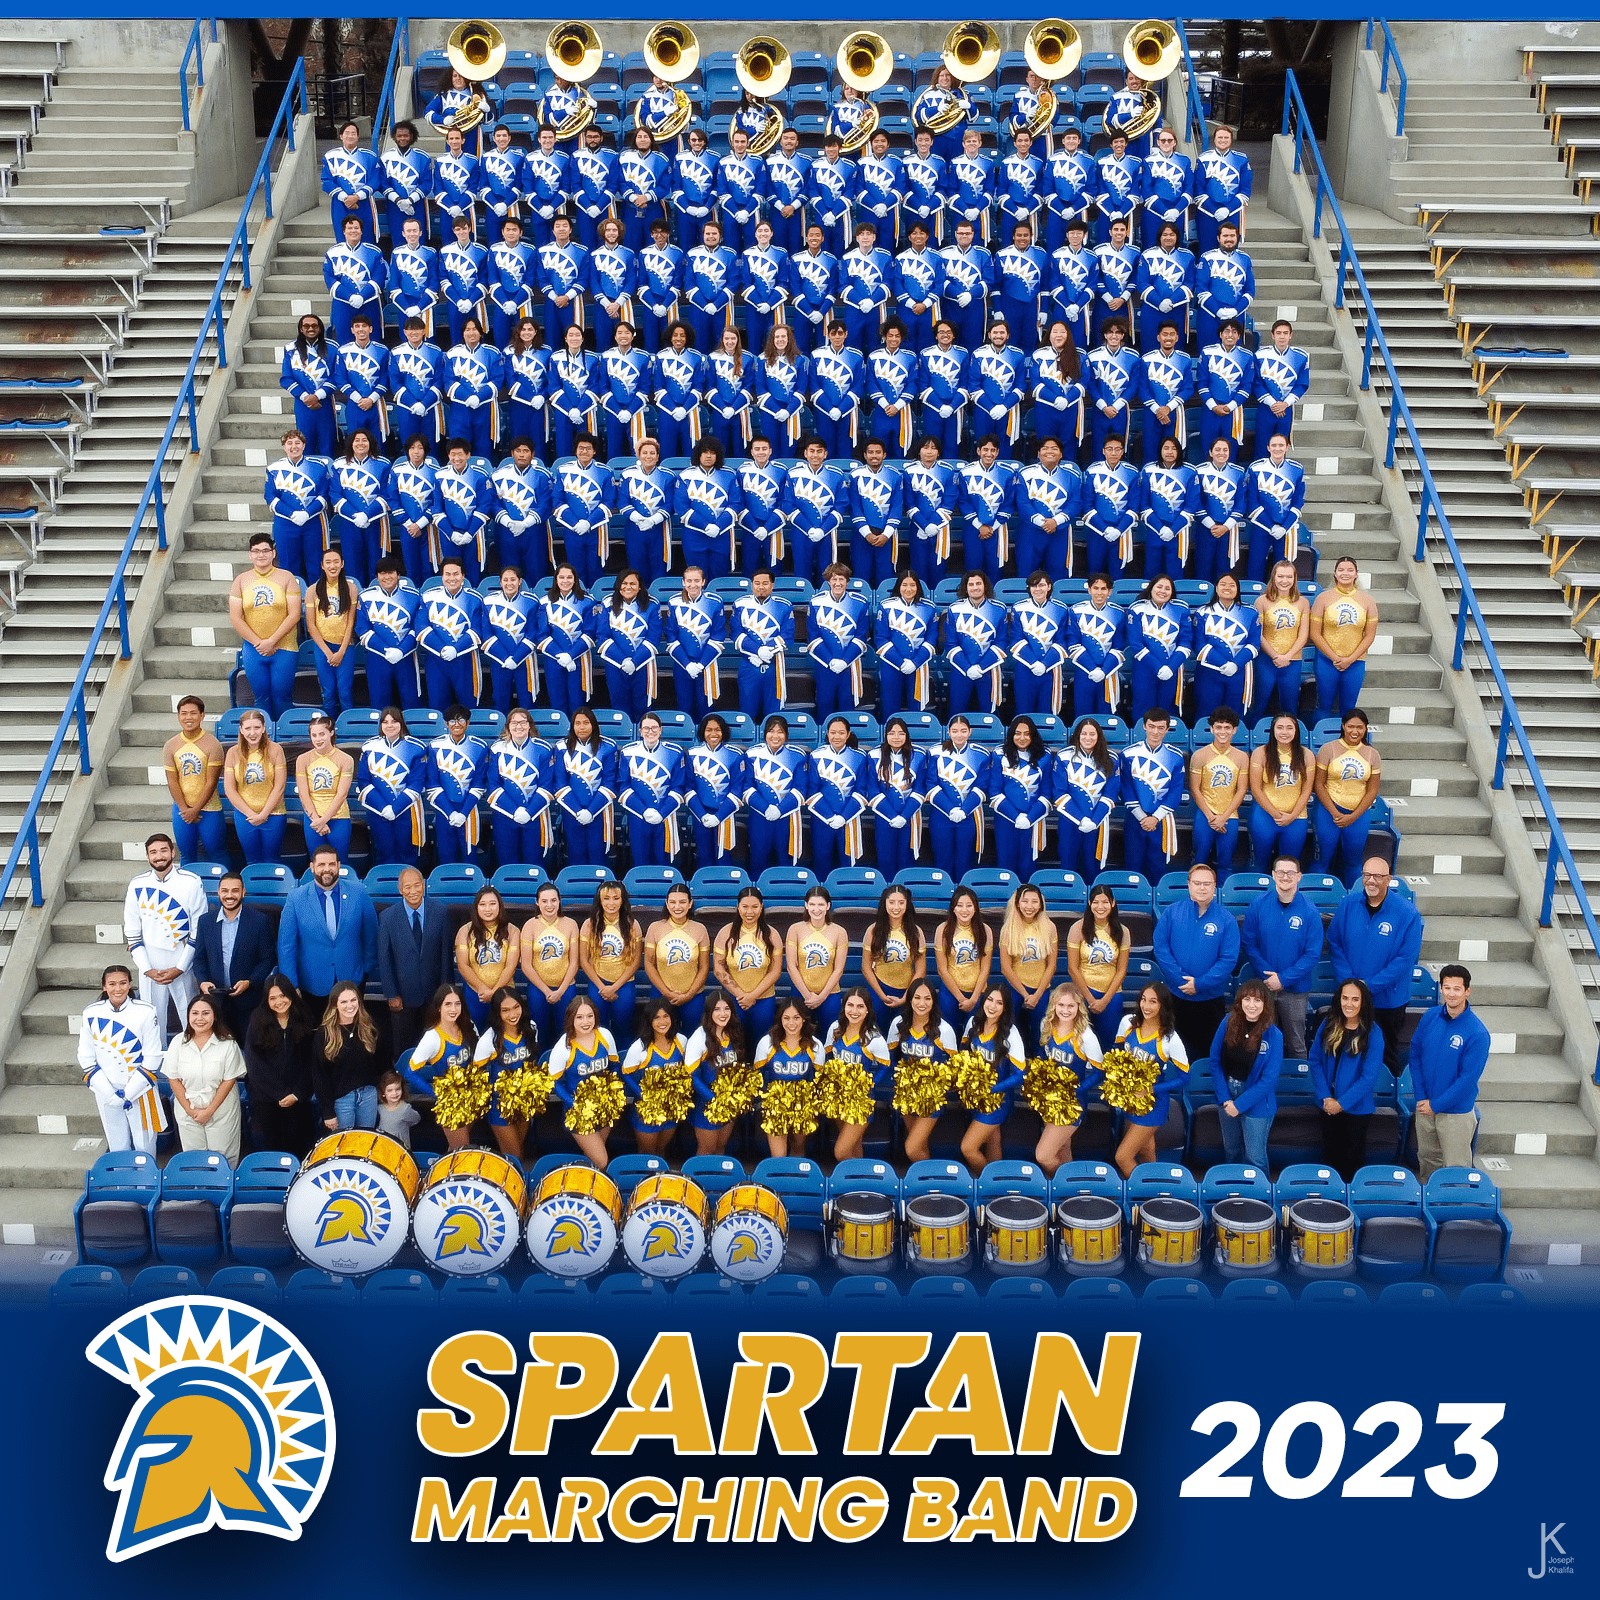 Group photo of the 2023 Spartan Marching Band